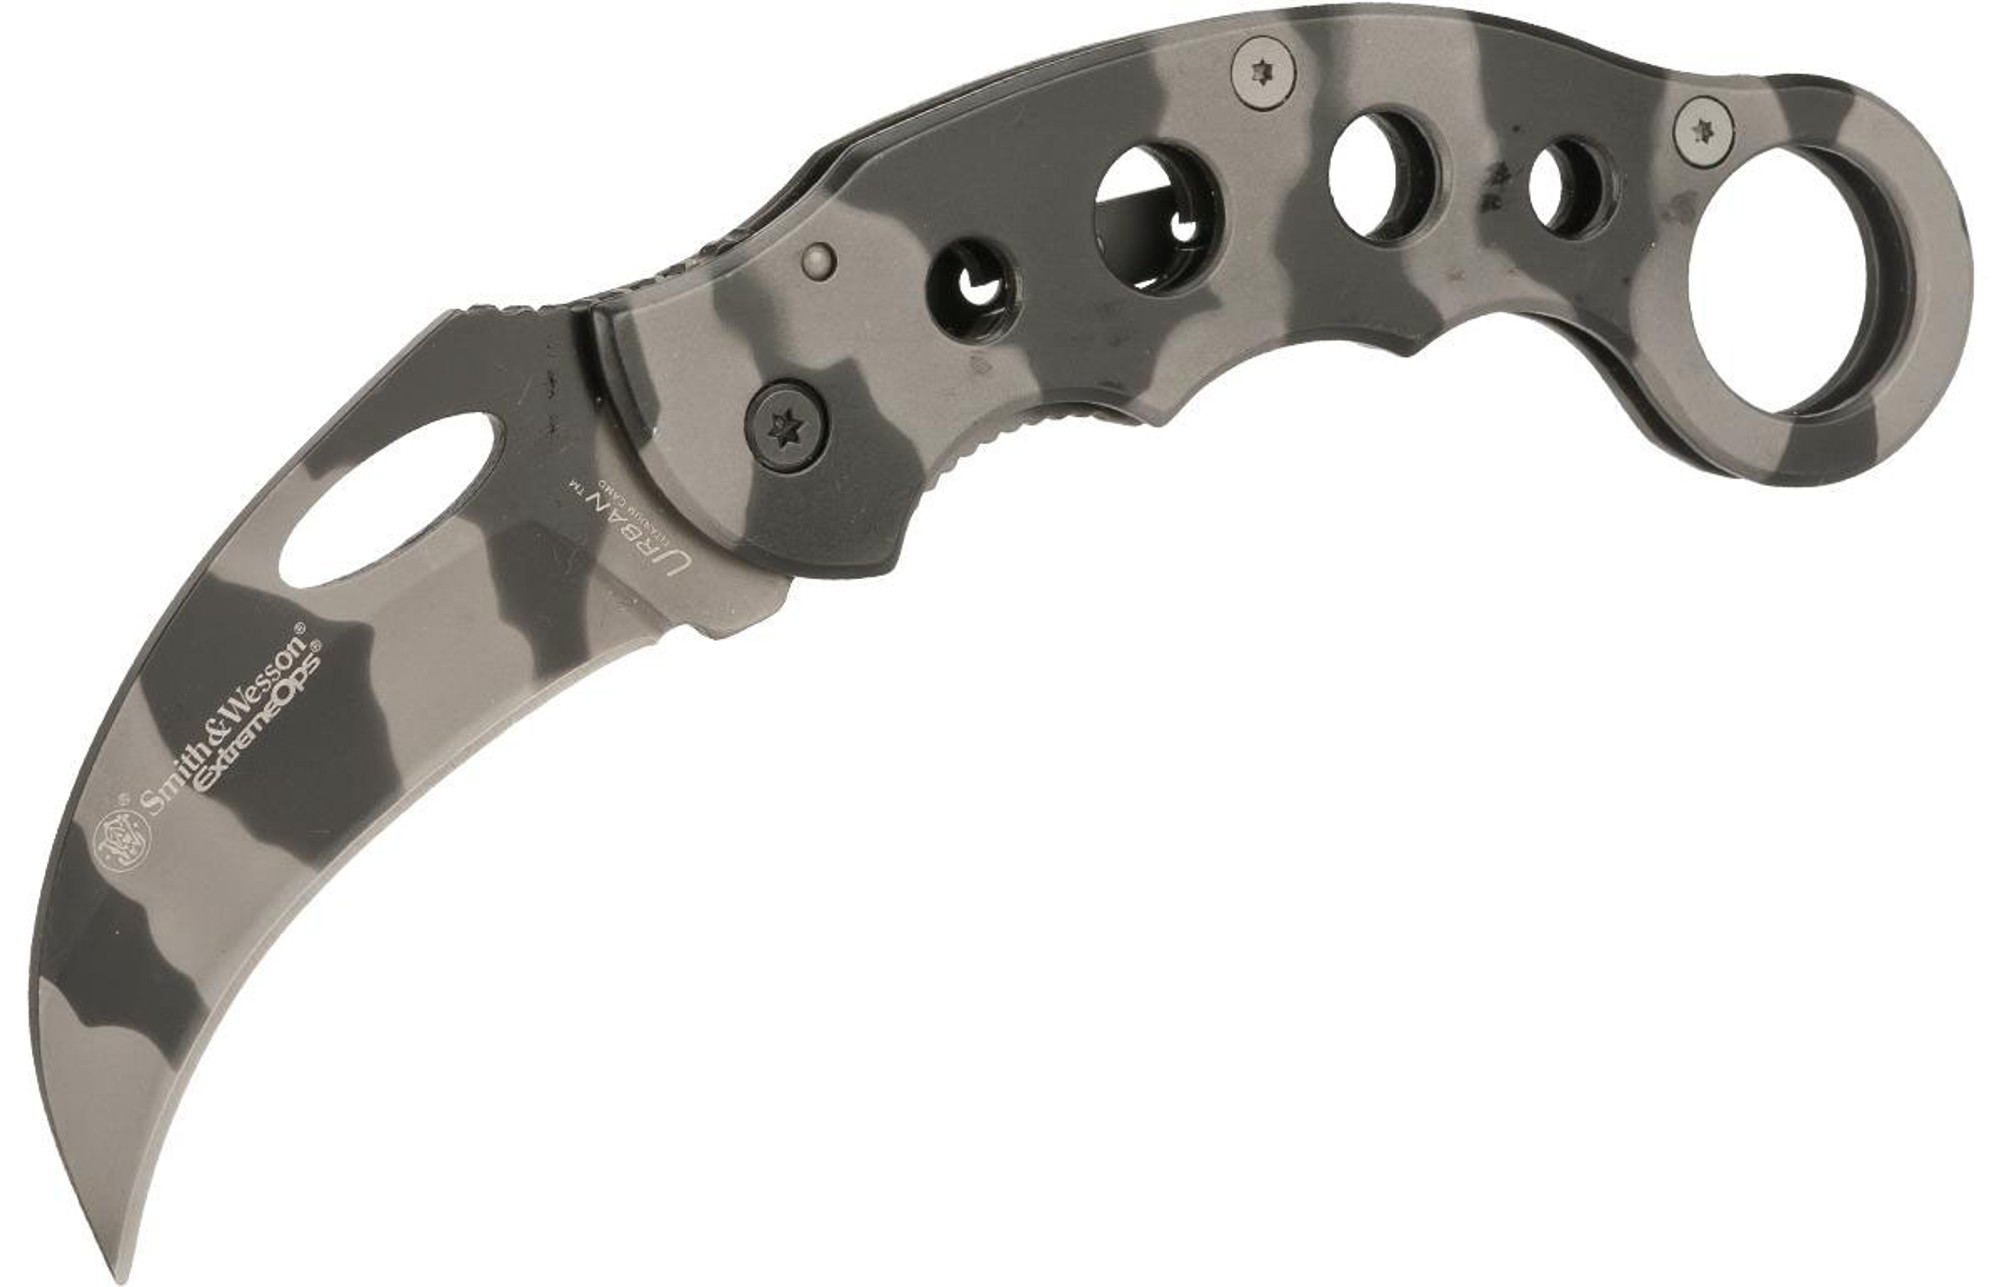 Smith and Wesson Hawkbill Knife with Urban Camo Finish